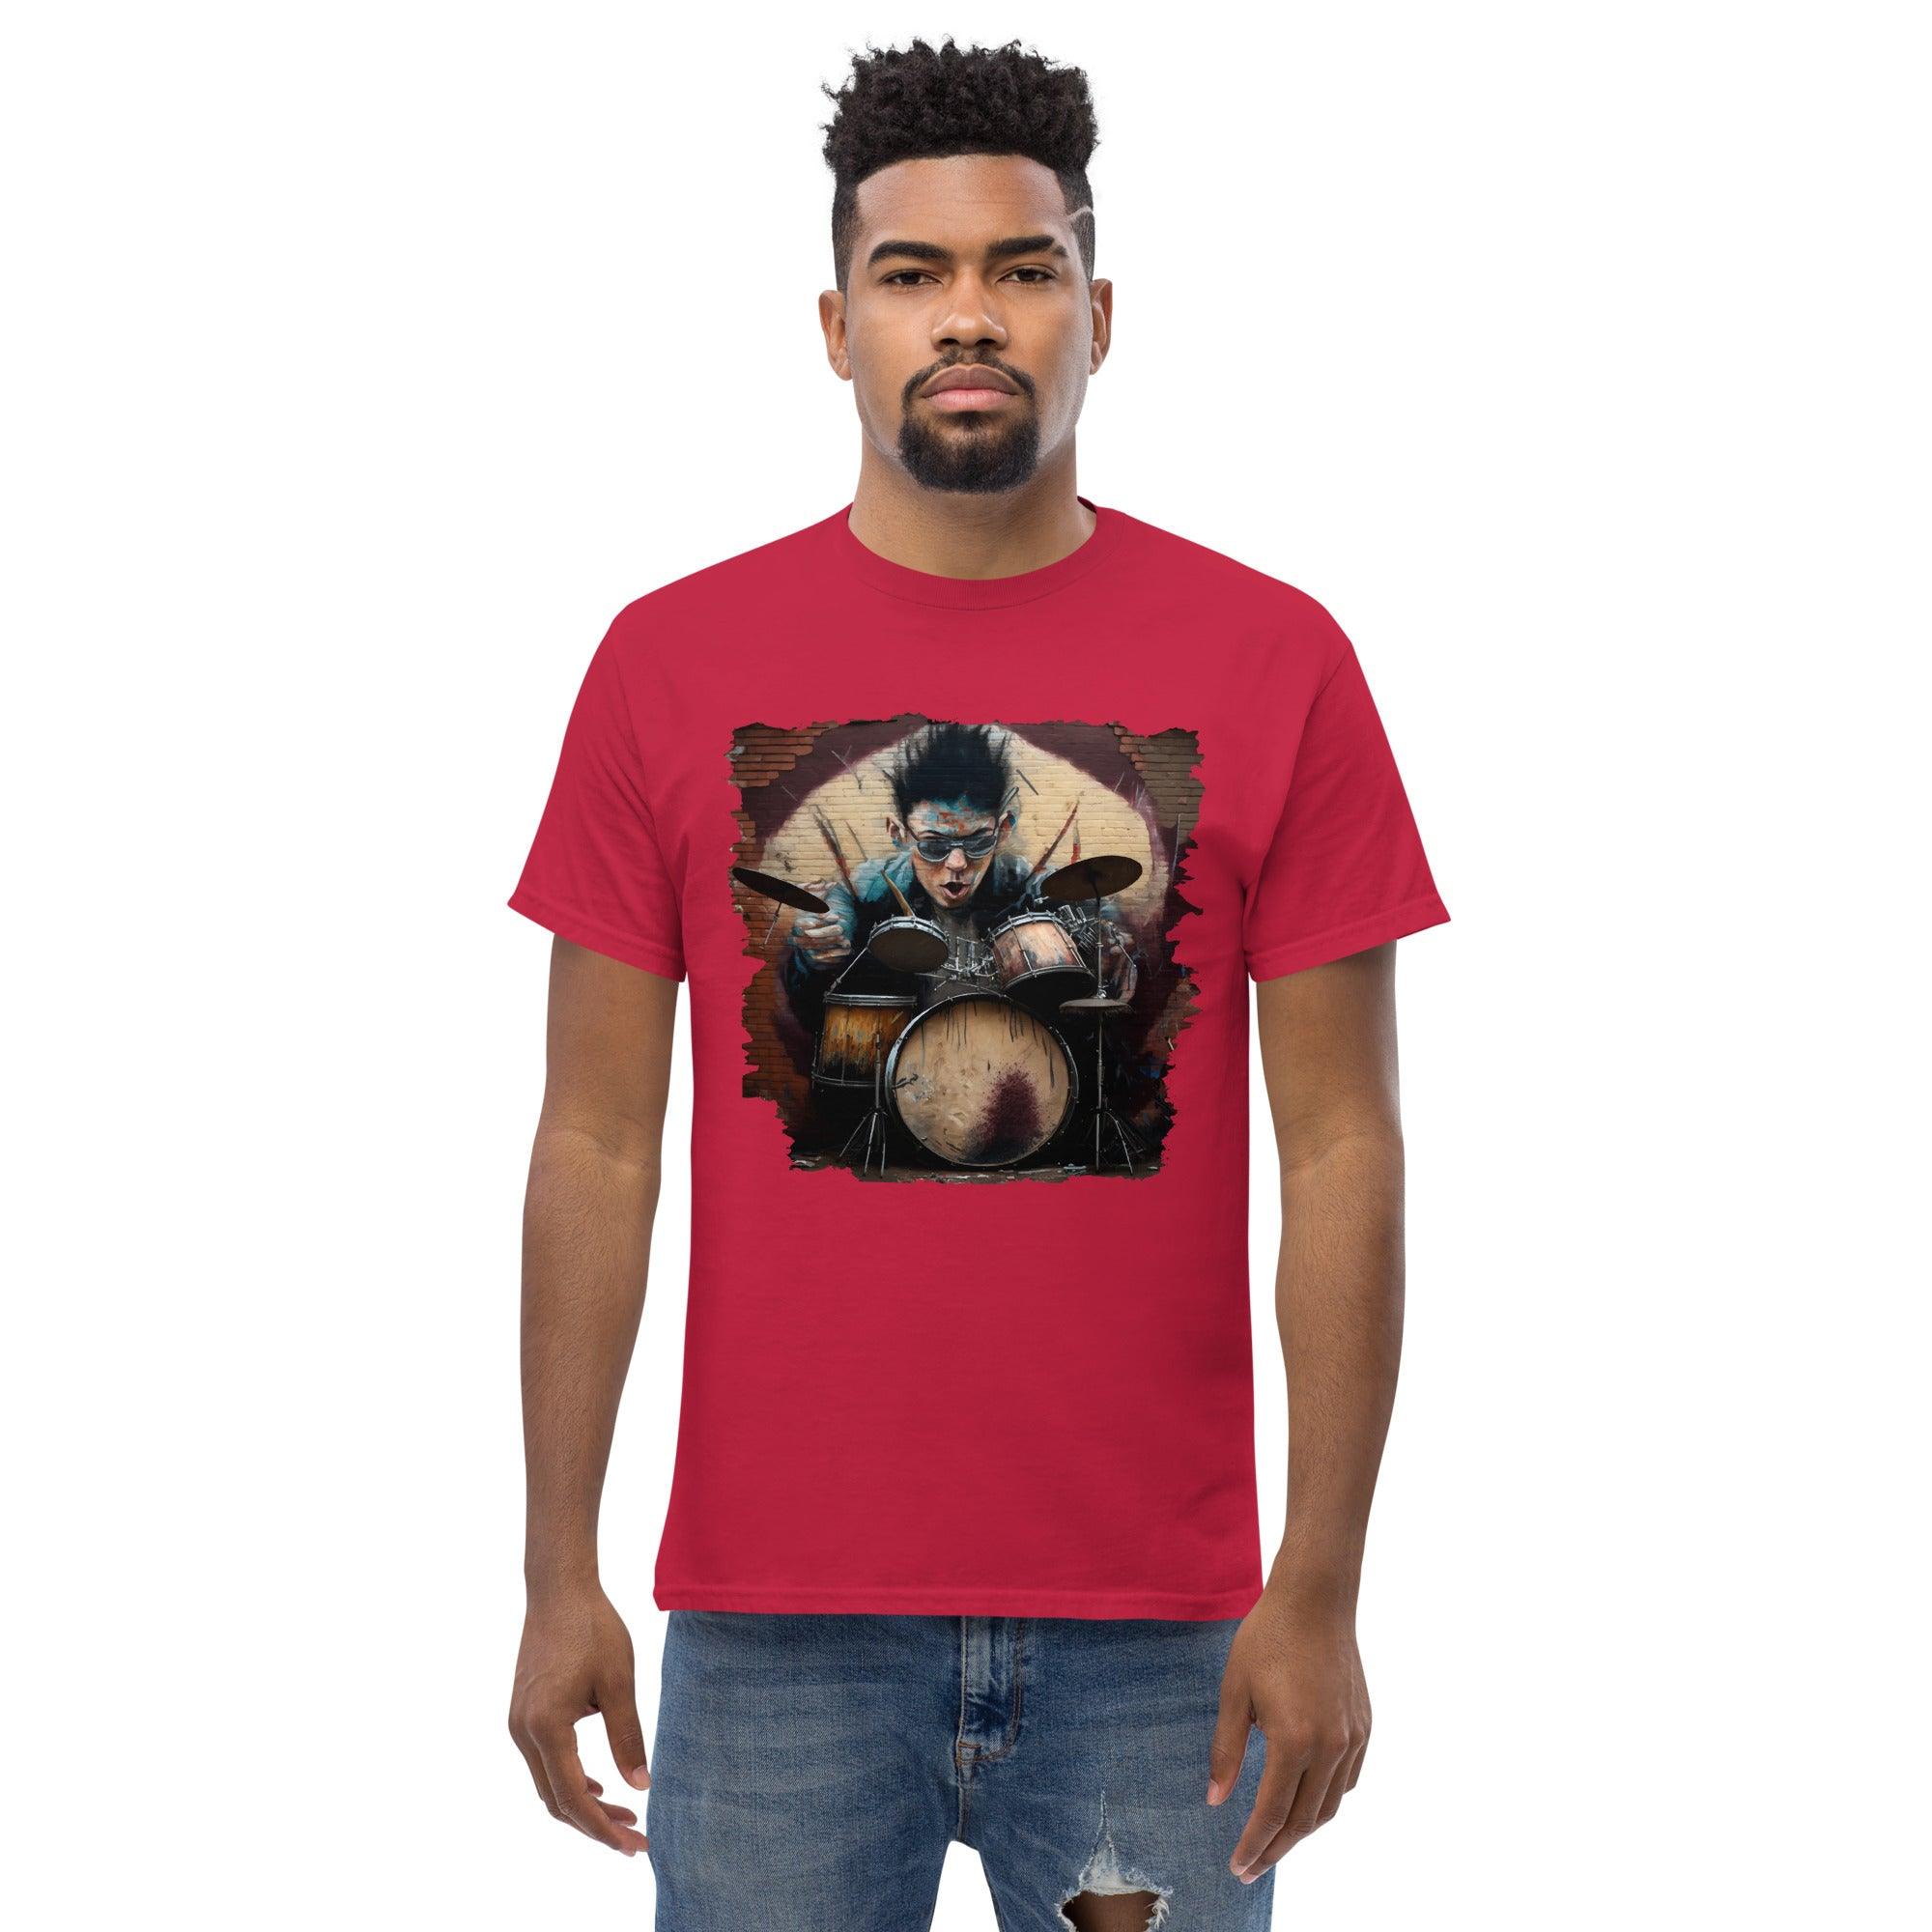 Dancing On The Drums Men's Classic Tee - Beyond T-shirts